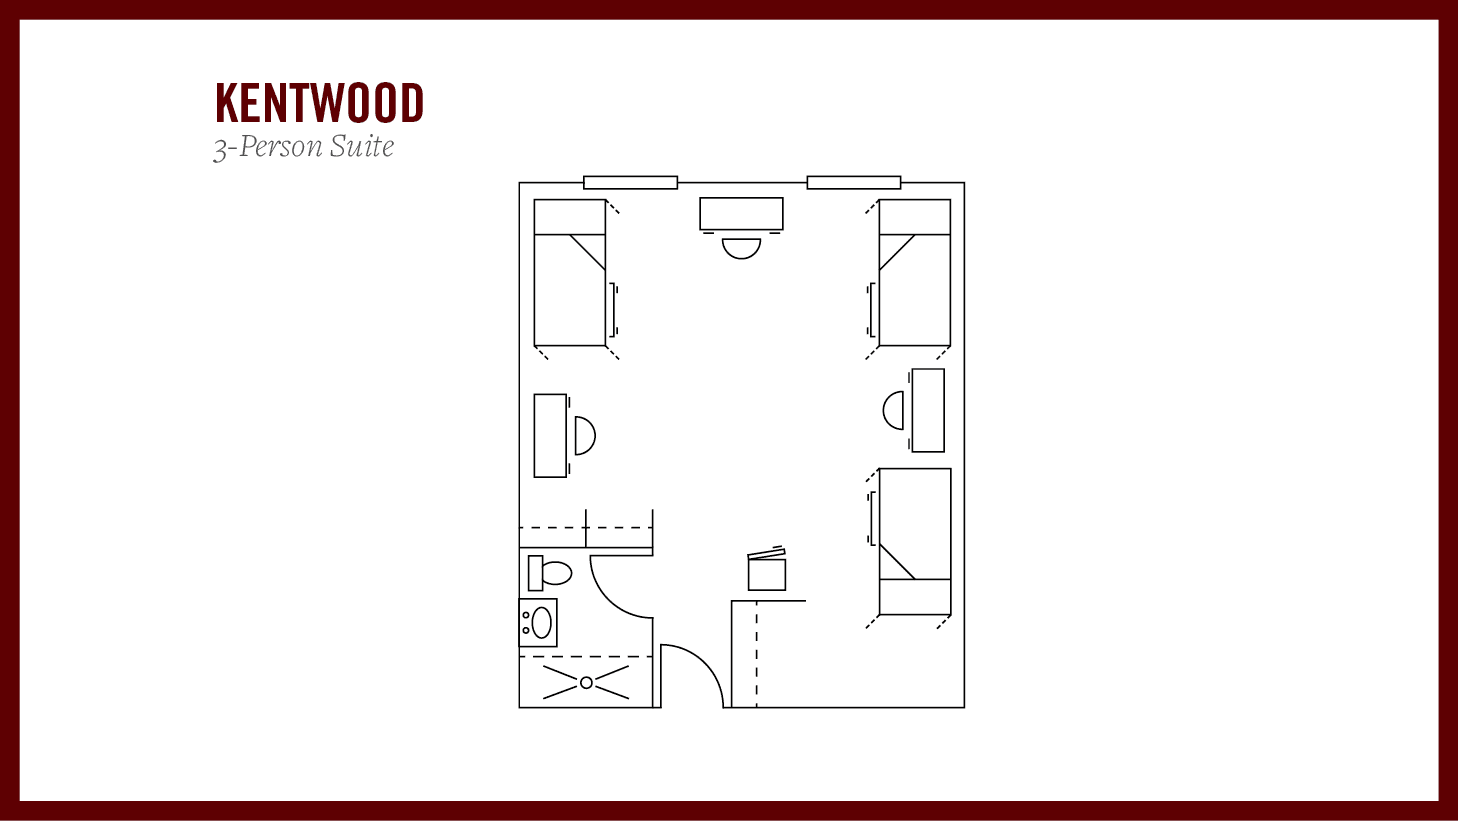 Kentwood 3-Person Suite